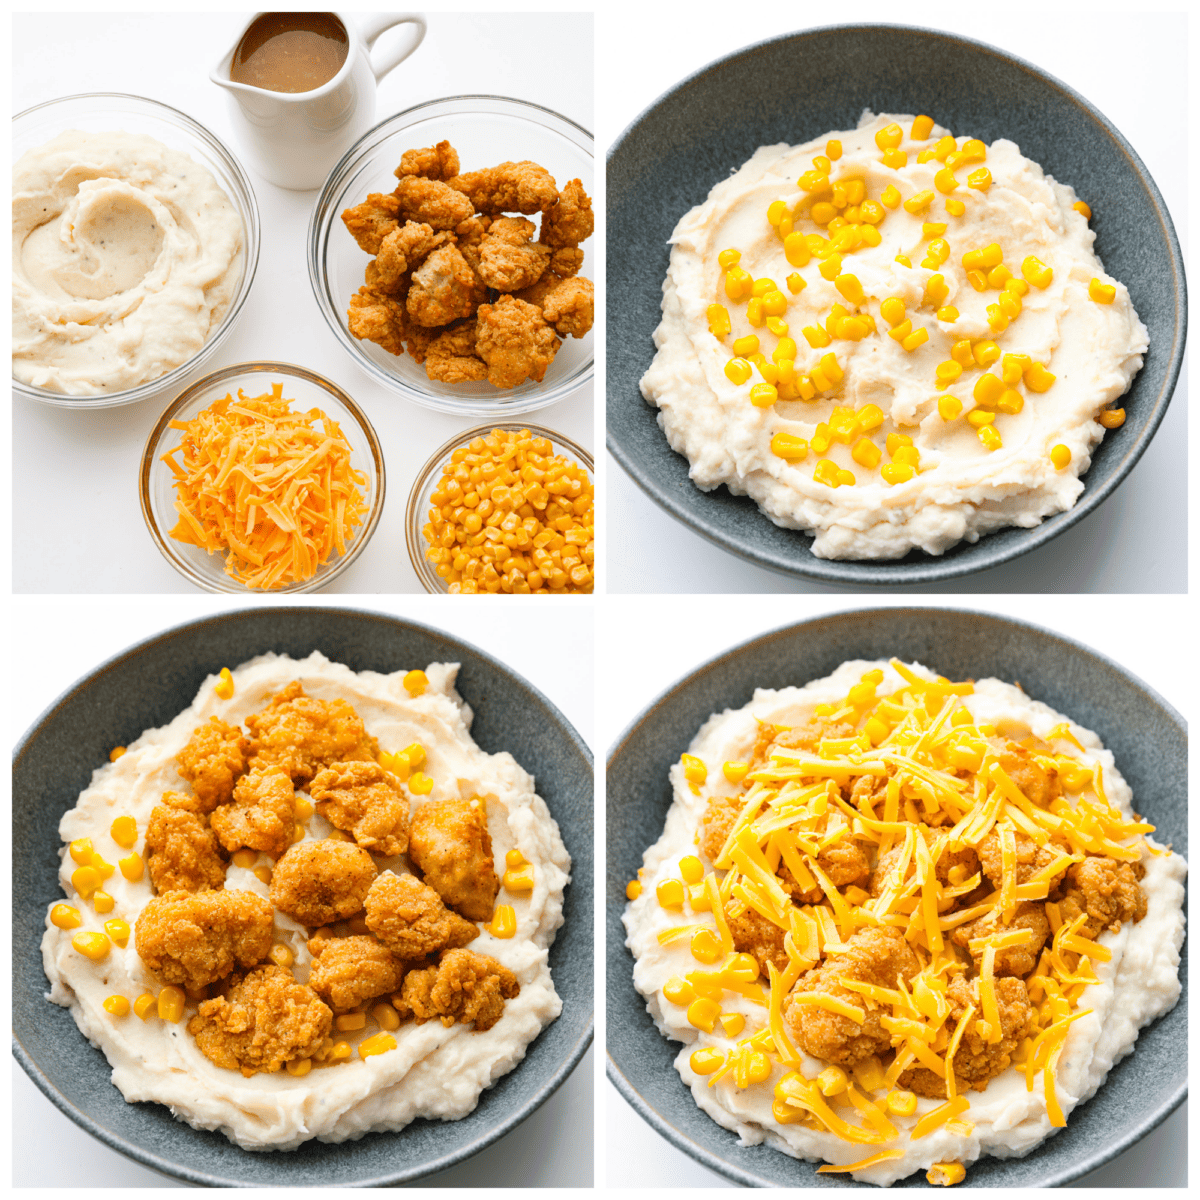 4-photo collage of a copycat KFC Famous Bowl being put together.